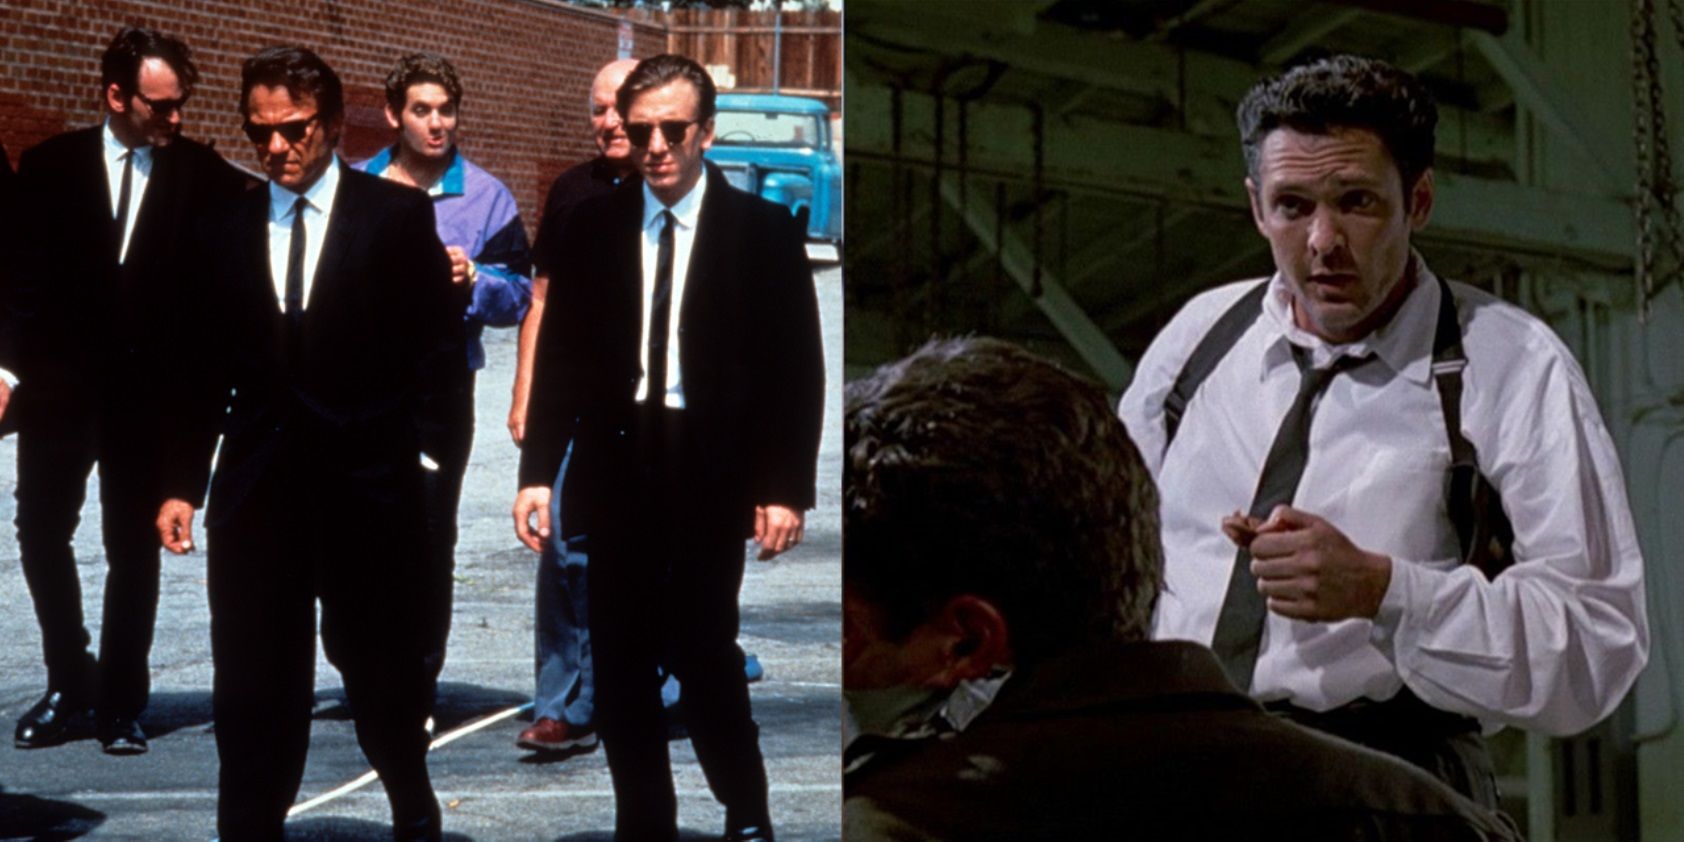 Split image of the thieves crossing a parking lot and Mr Blonde torturing a cop in Reservoir Dogs